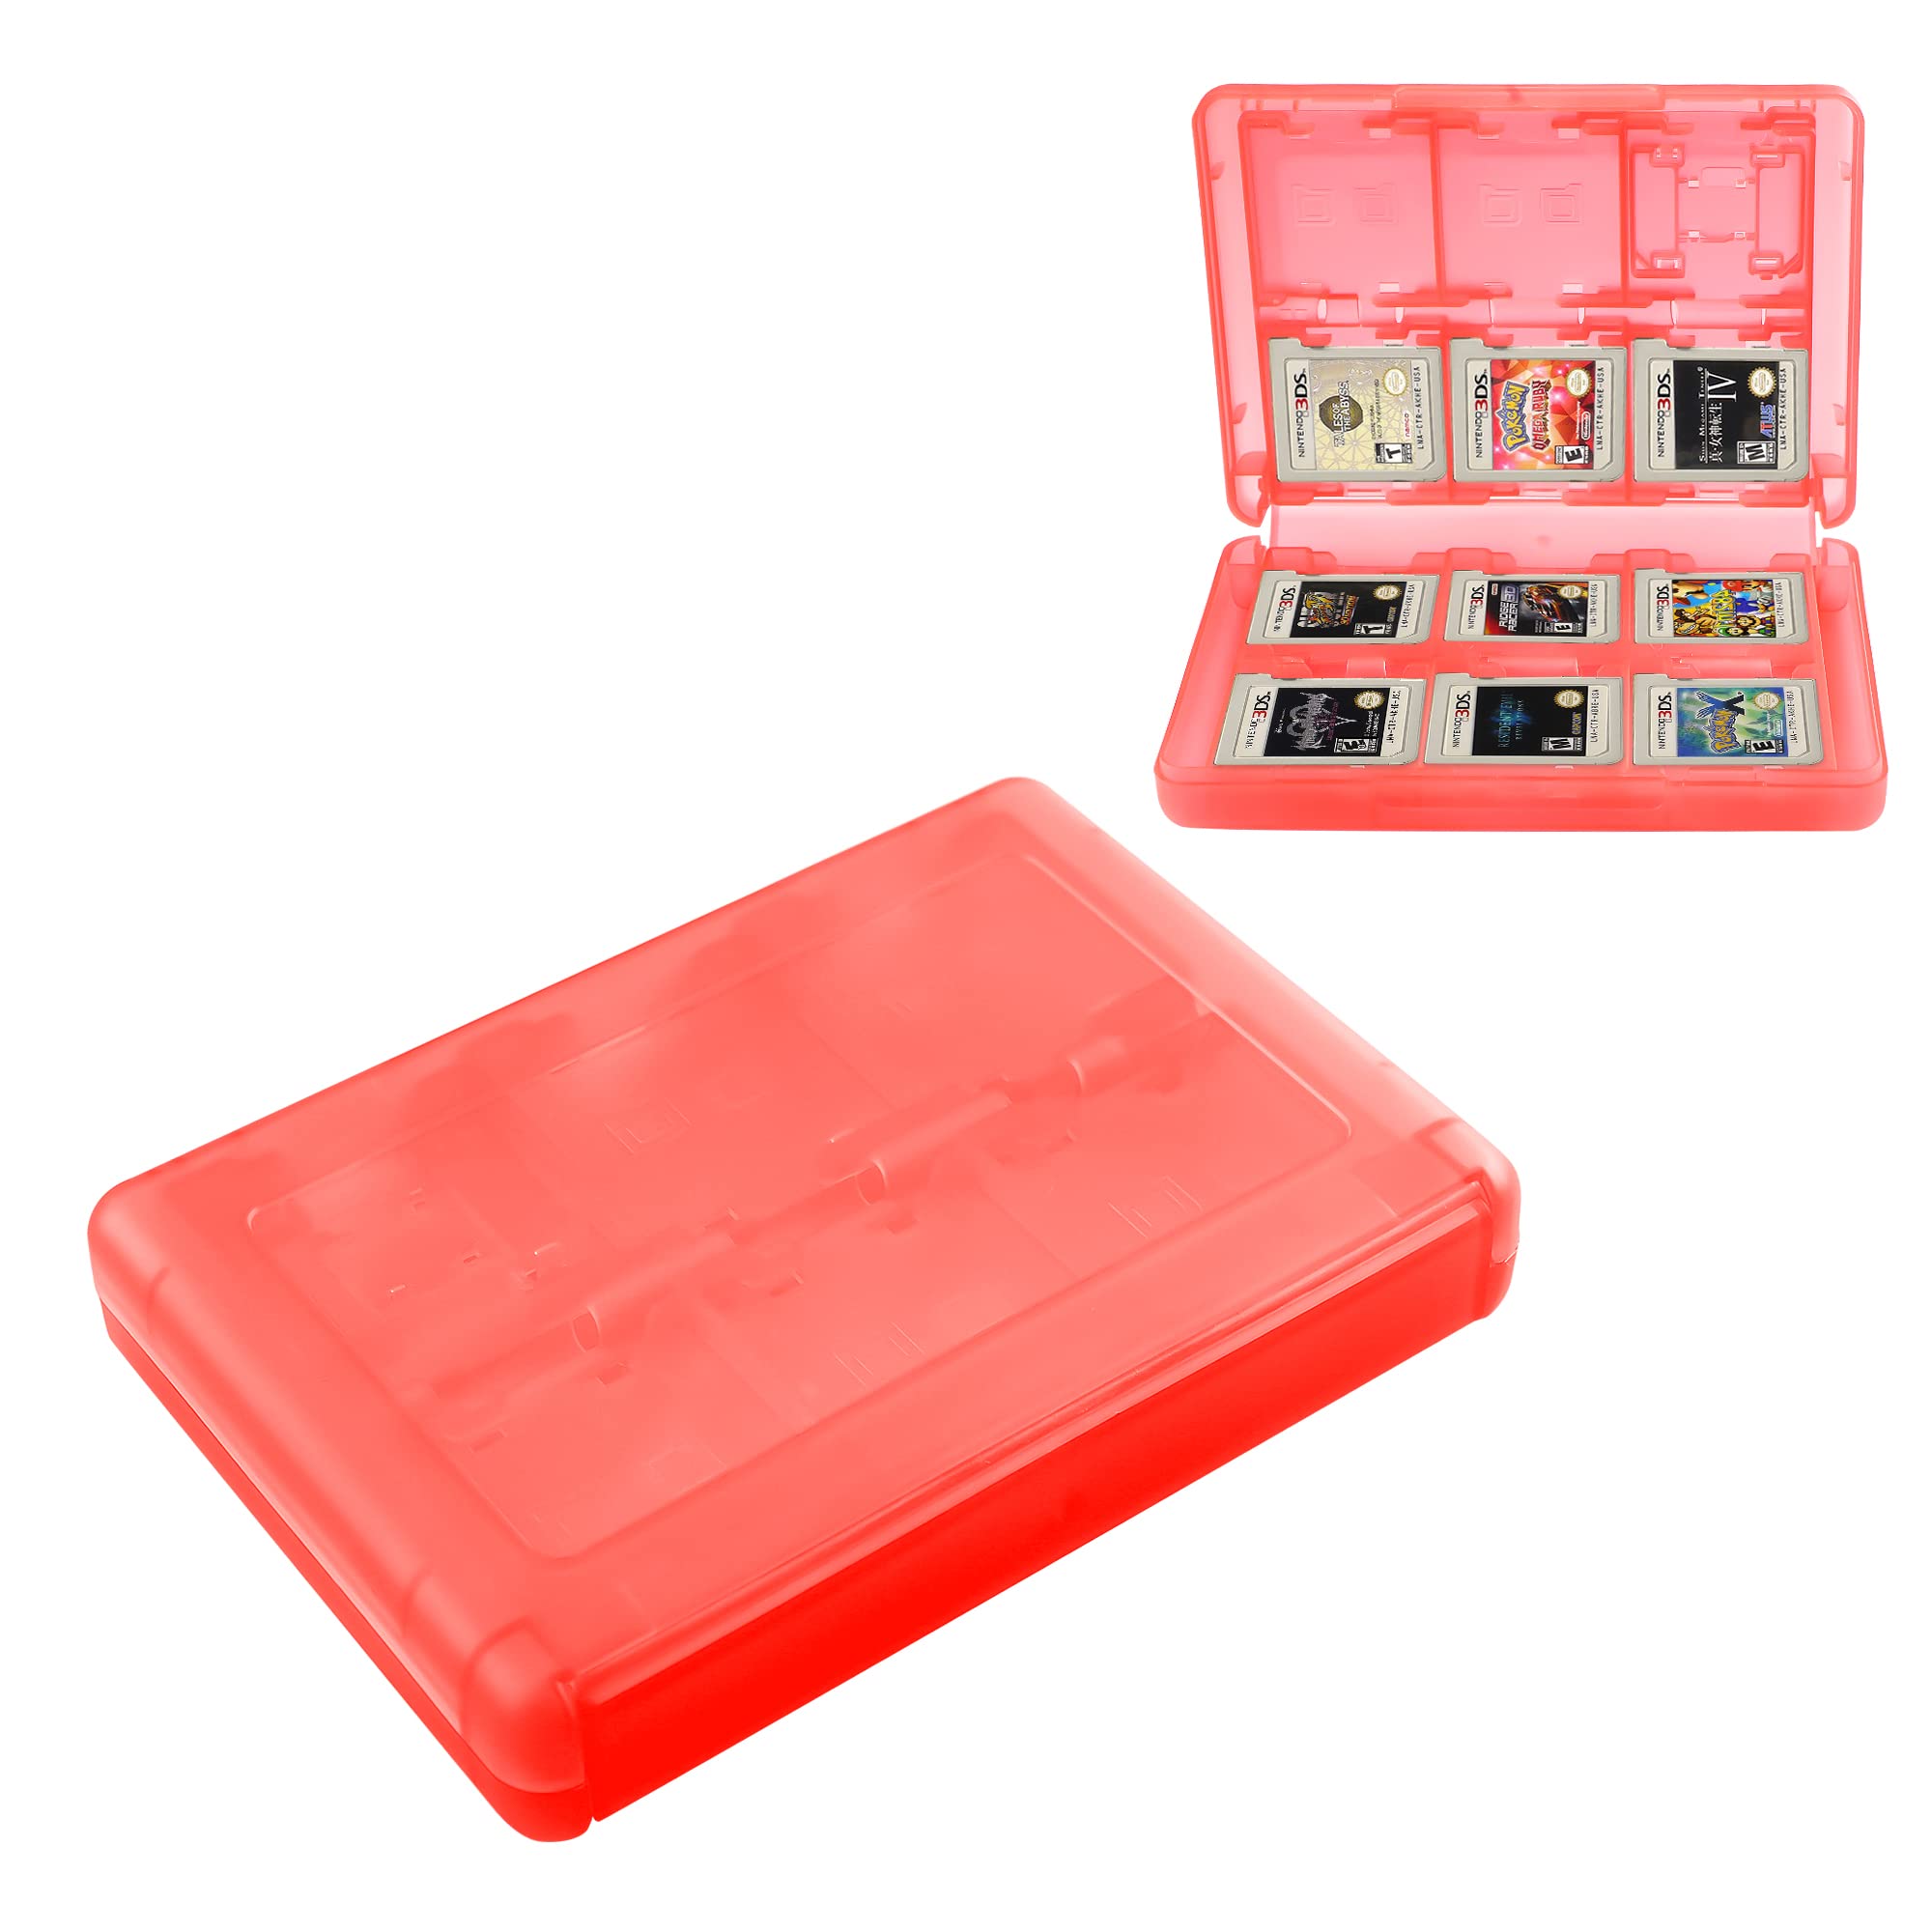 3DS Game Holder Card Case, 28-in-1 Game Holder Card Case Compatible with Nintendo New 3DS / New 3DS XL / 3DS / 3DS XL / DSi / DSi XL / DS / New 2DS /New 2DS XL / 2DS/ 2DS XL Catridge Storage Box Red